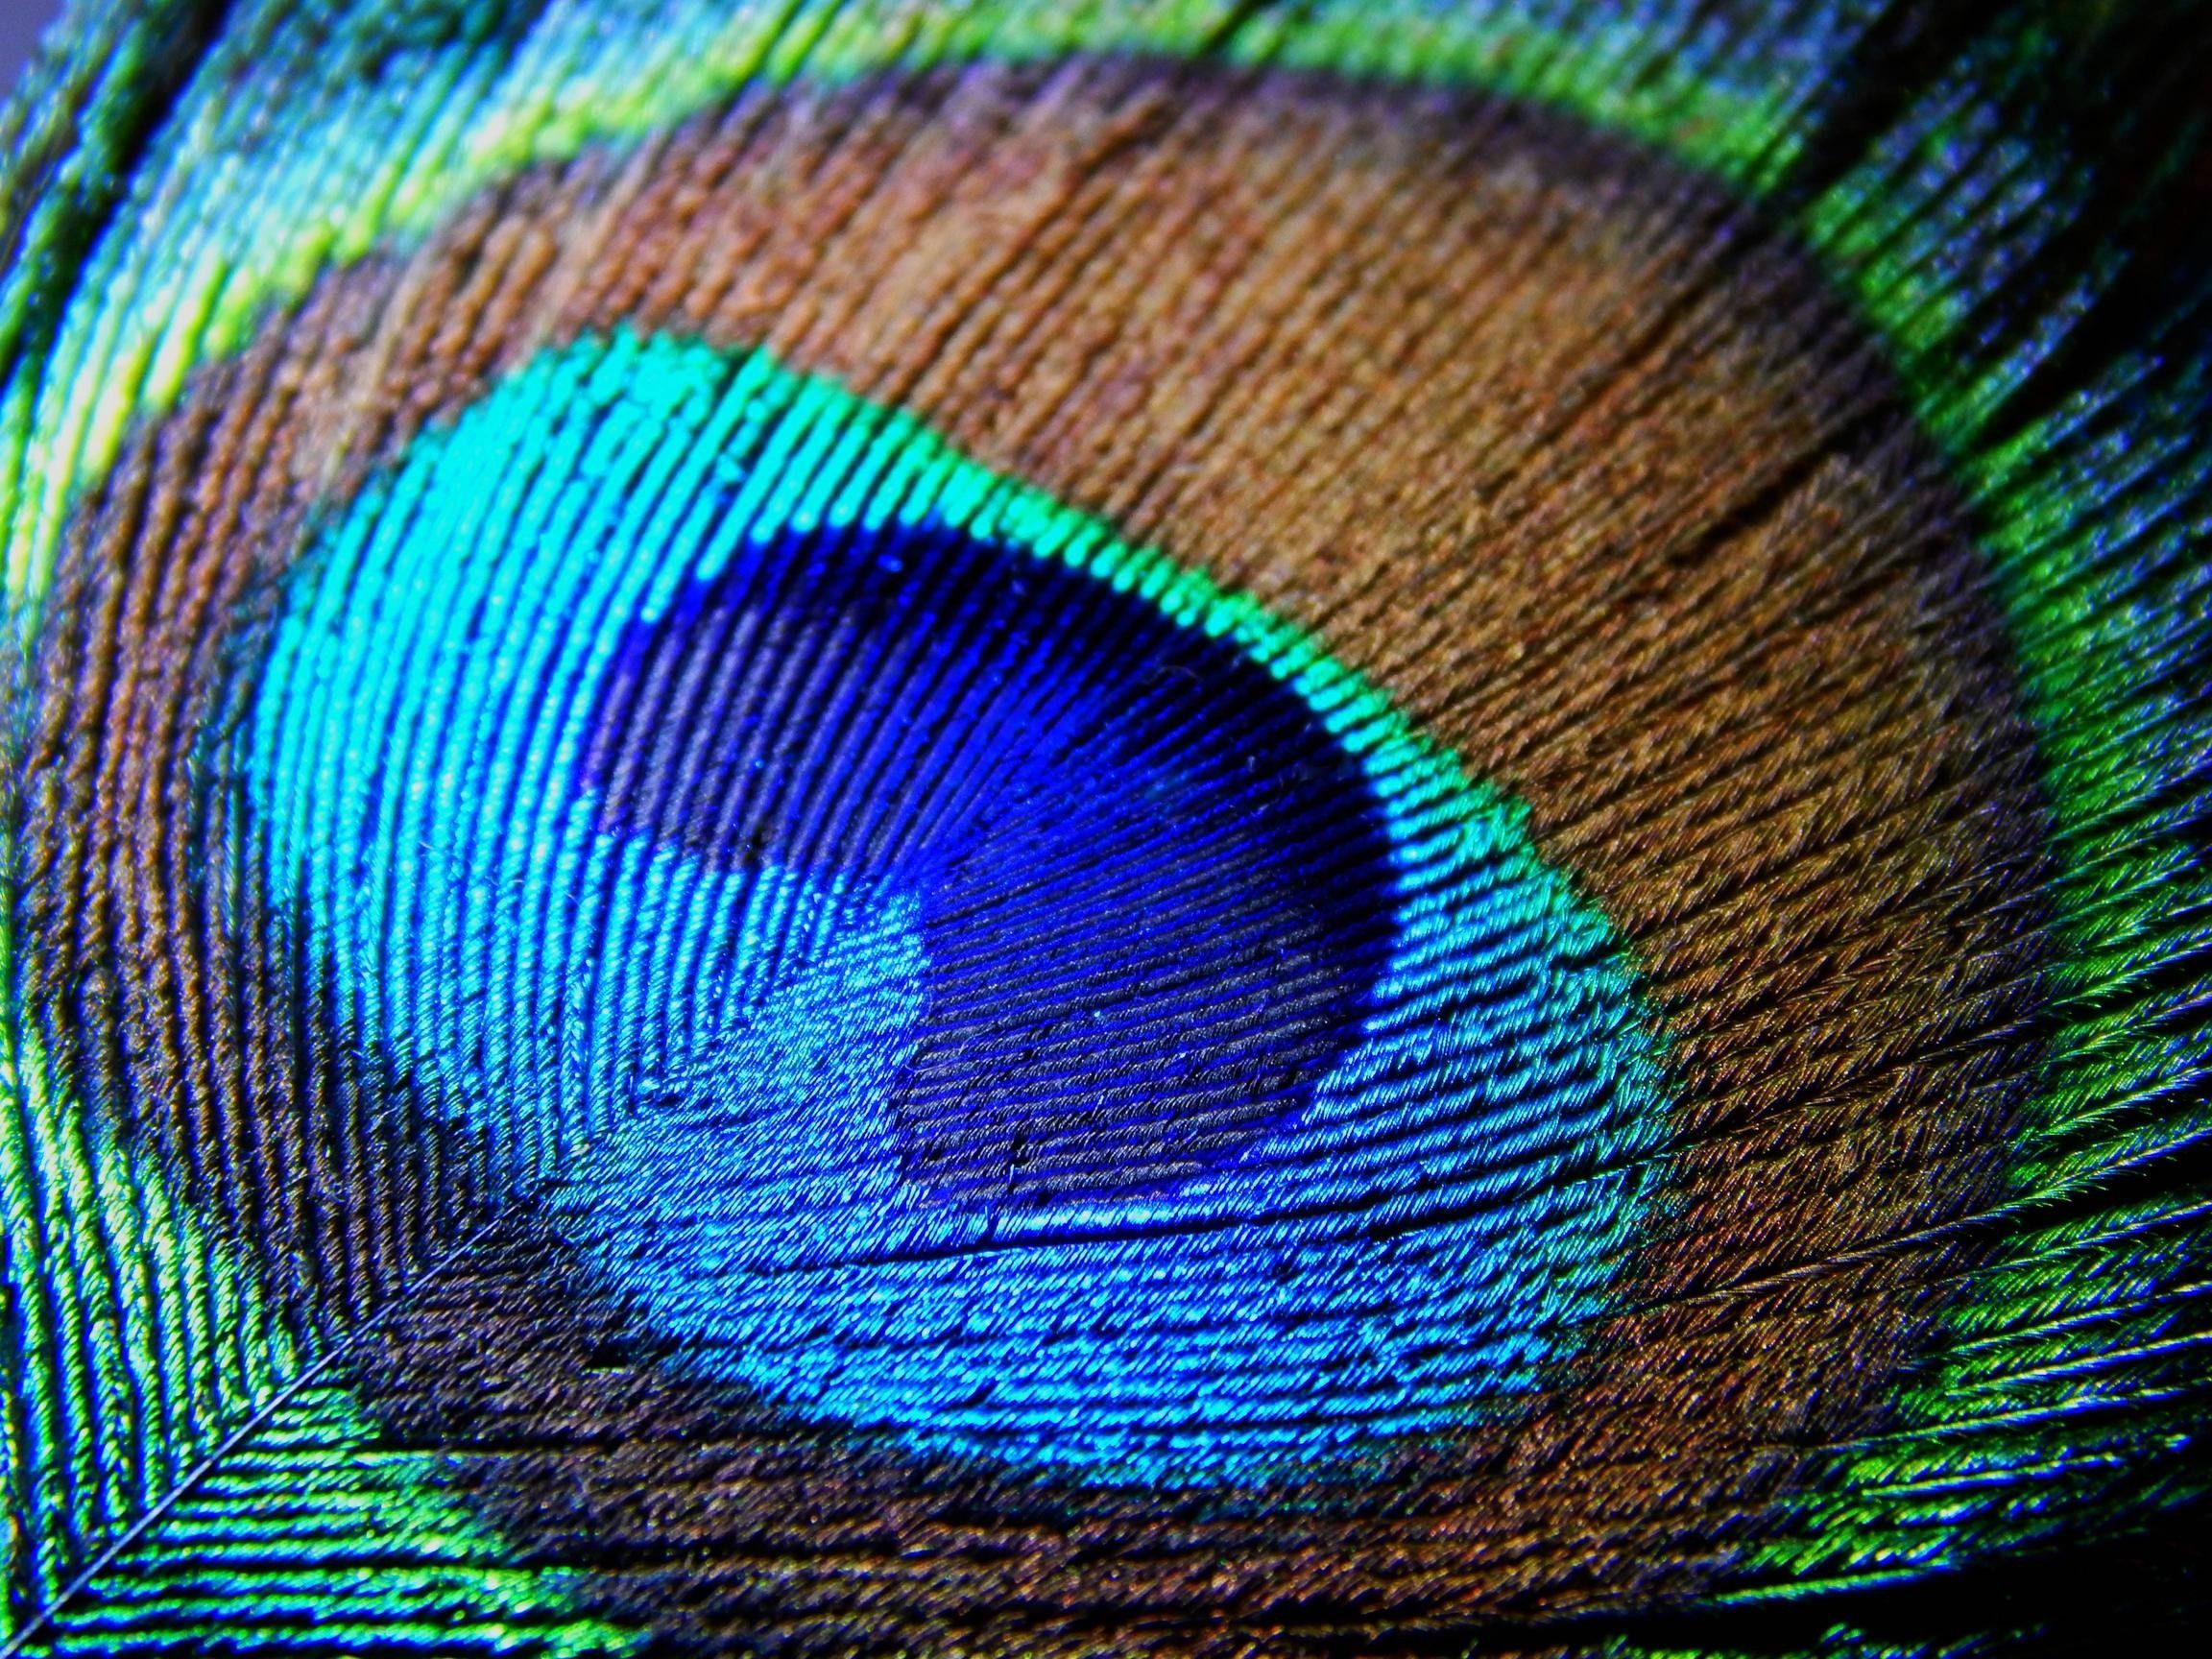 2304x1728 Peacock Feather Image Hd